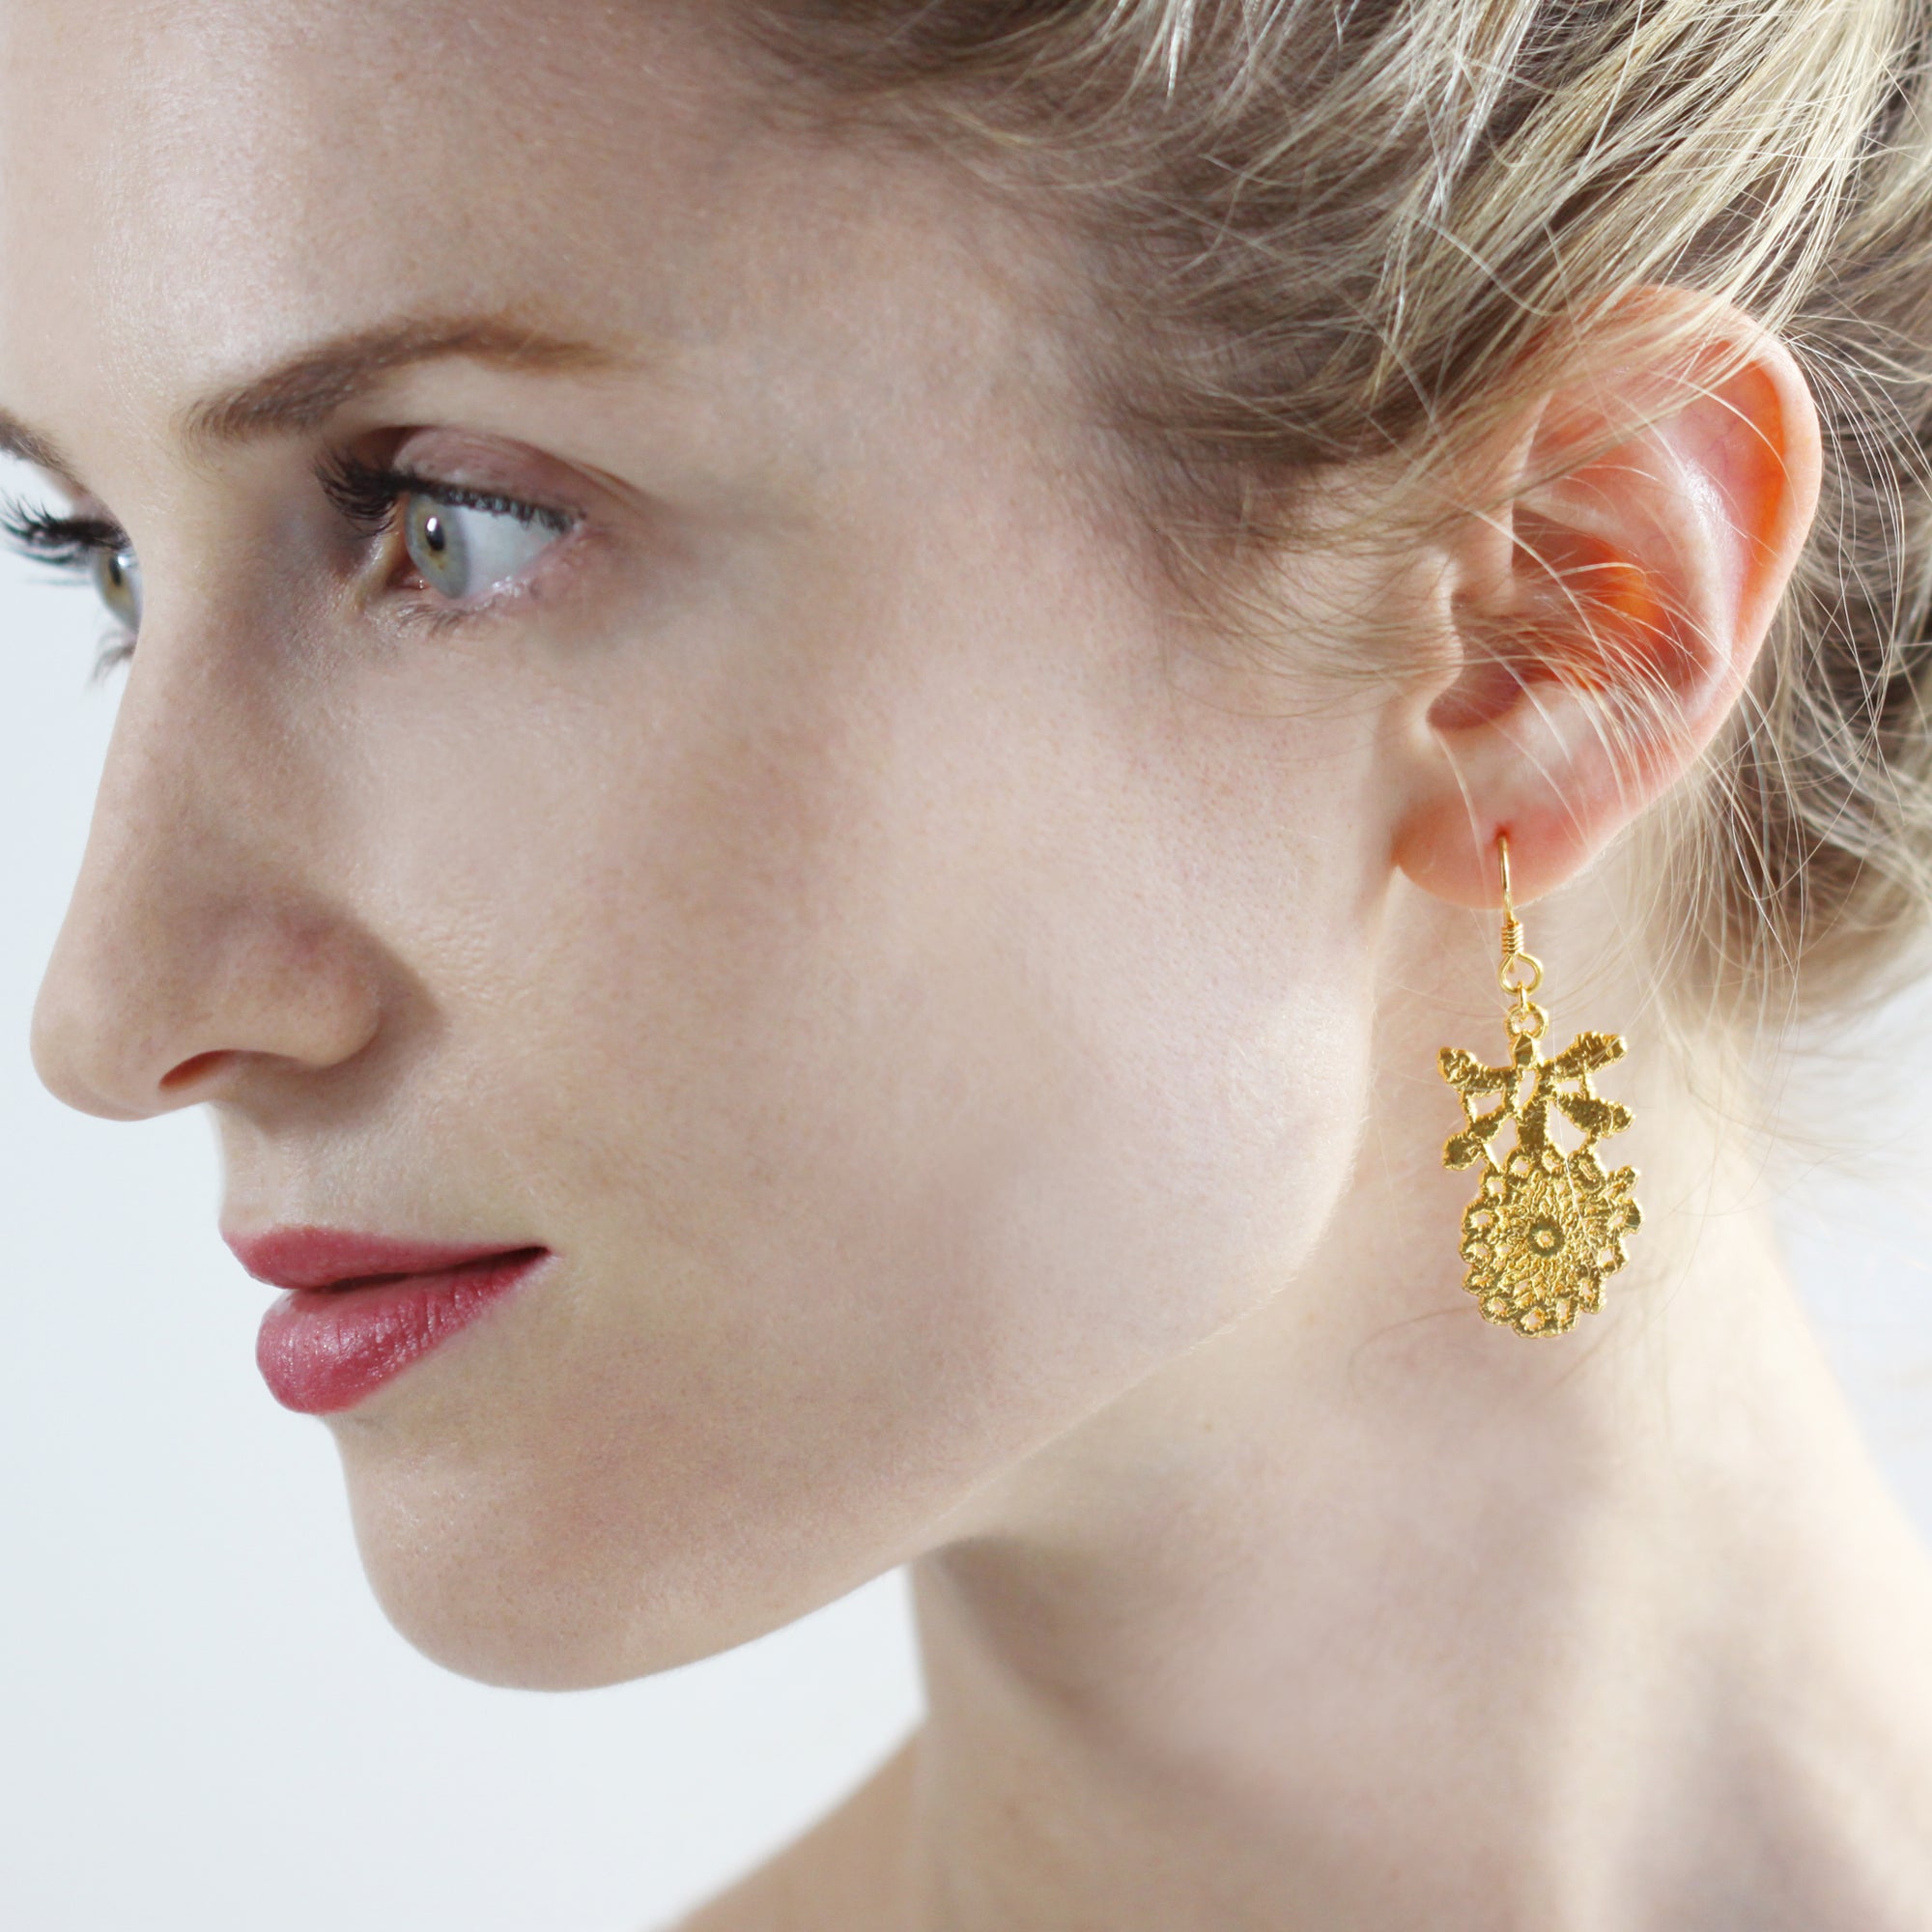 Lace flower earrings with French hooks dipped in 24k gold.